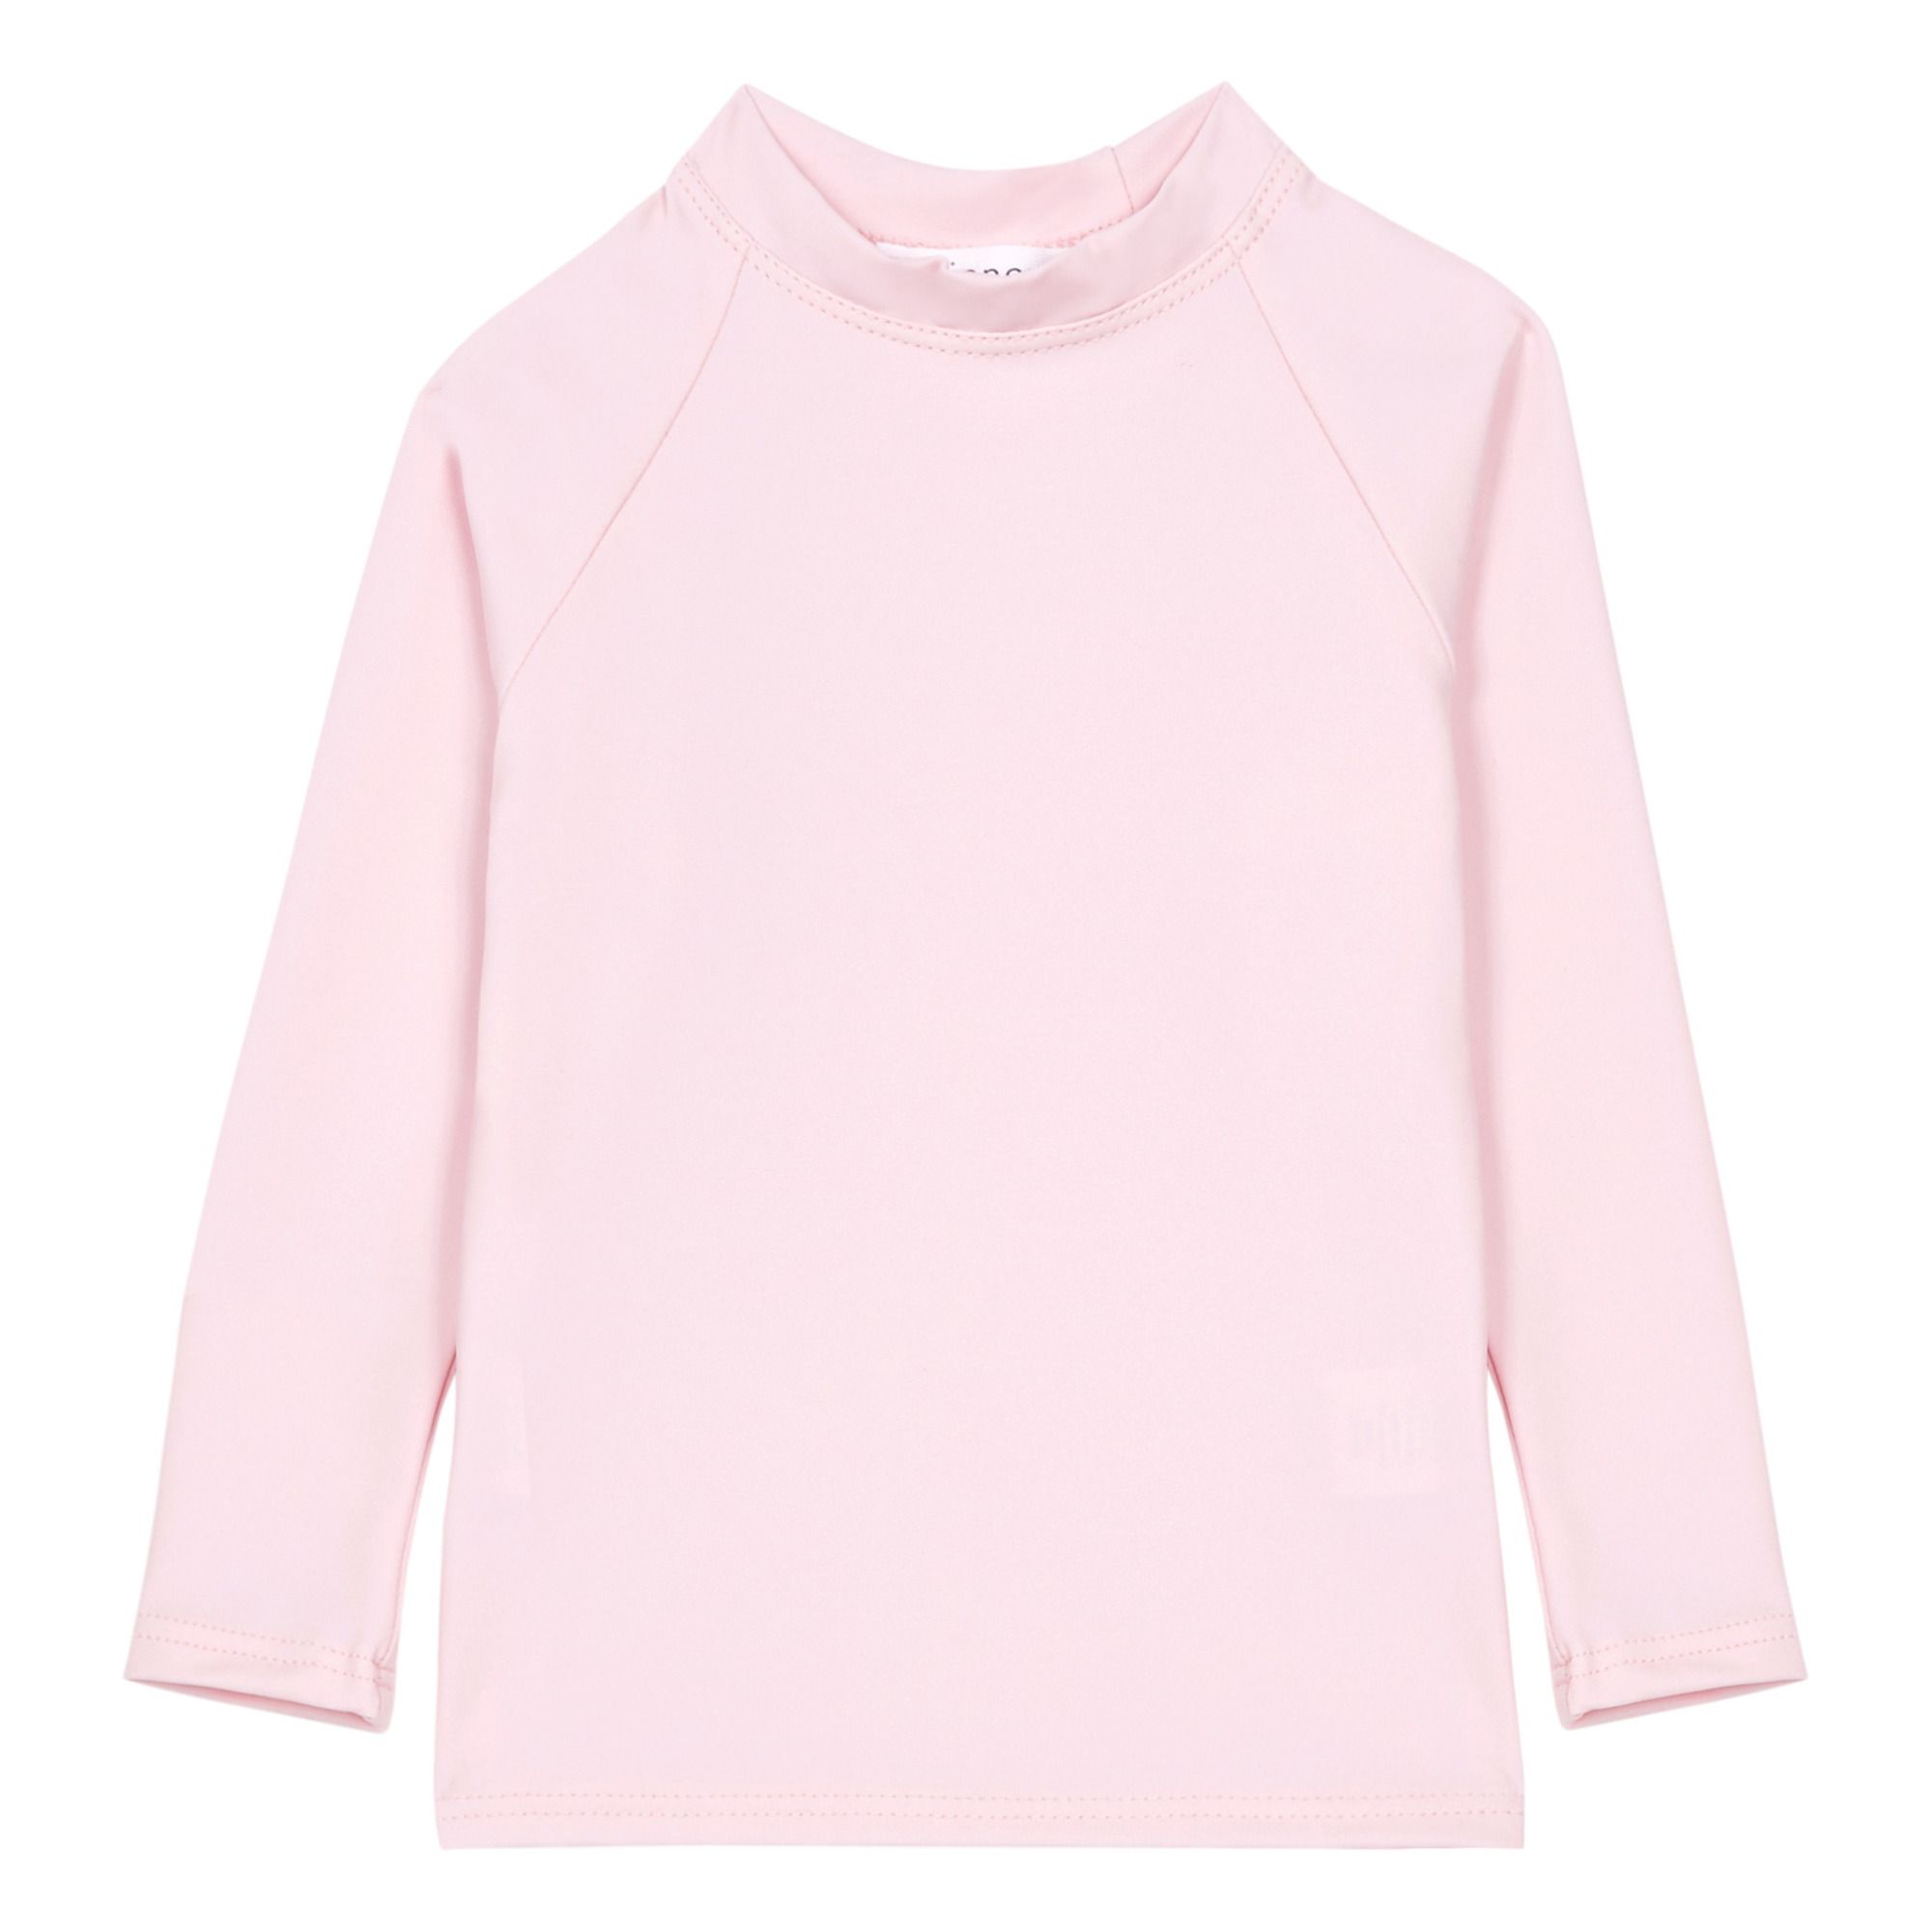 Minnow - T-Shirt Manches Longues Anti-UV - Fille - Rose